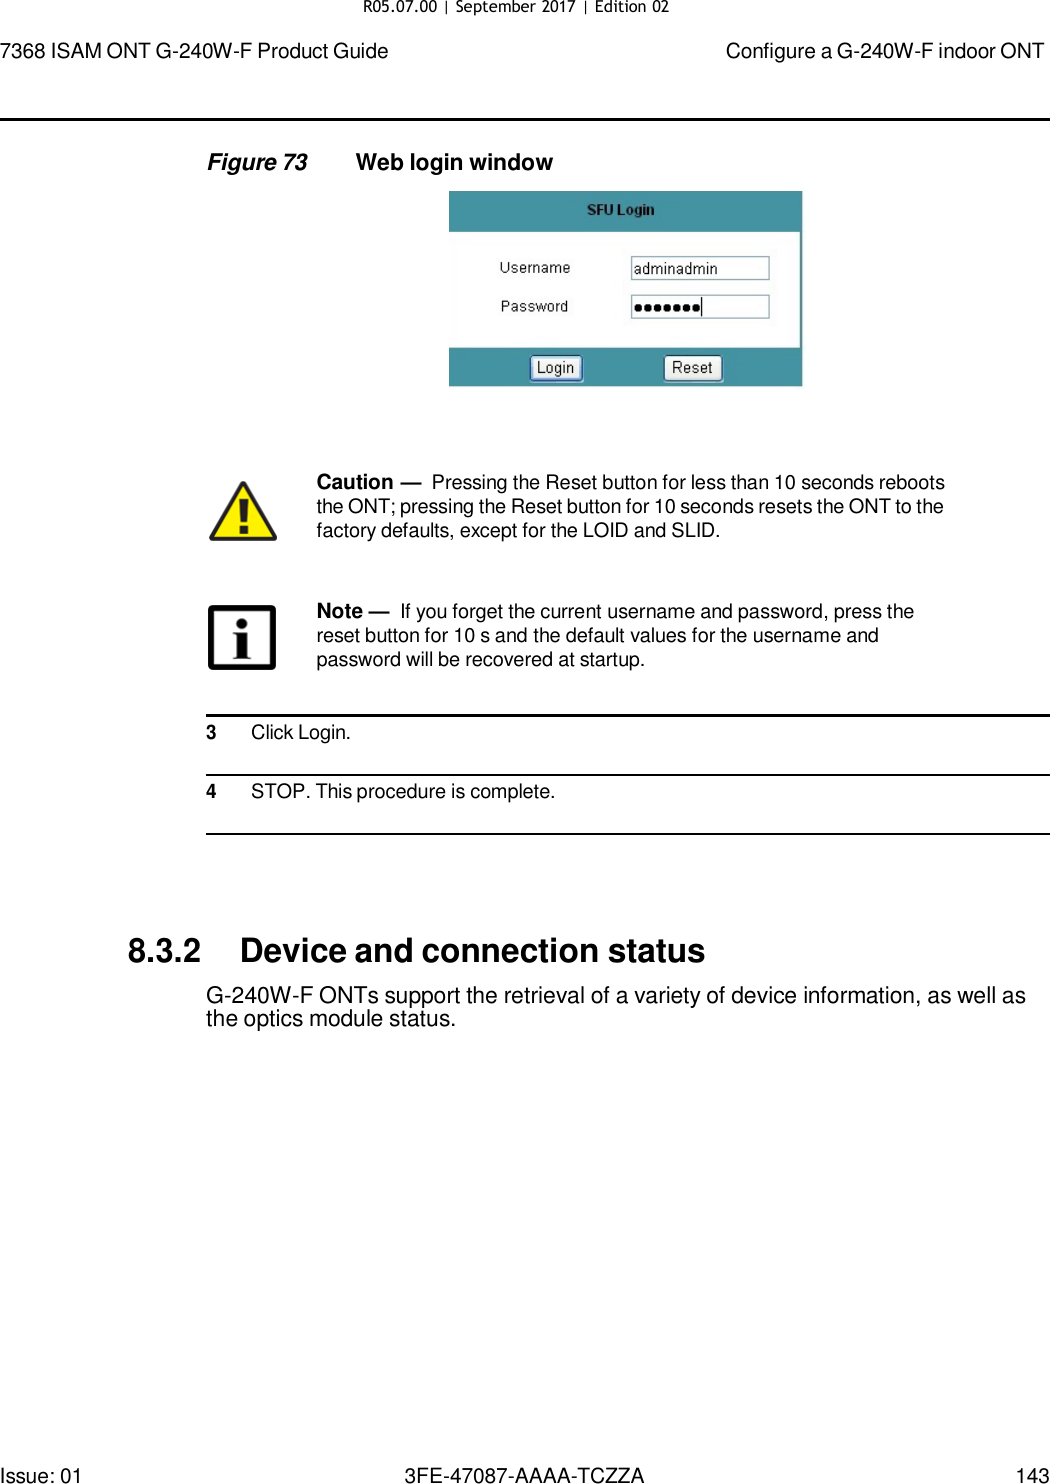 Page 137 of Nokia Bell G240WFV2 7368 ISAM GPON ONU User Manual 7368 ISAM ONT G 240W F Product Guide